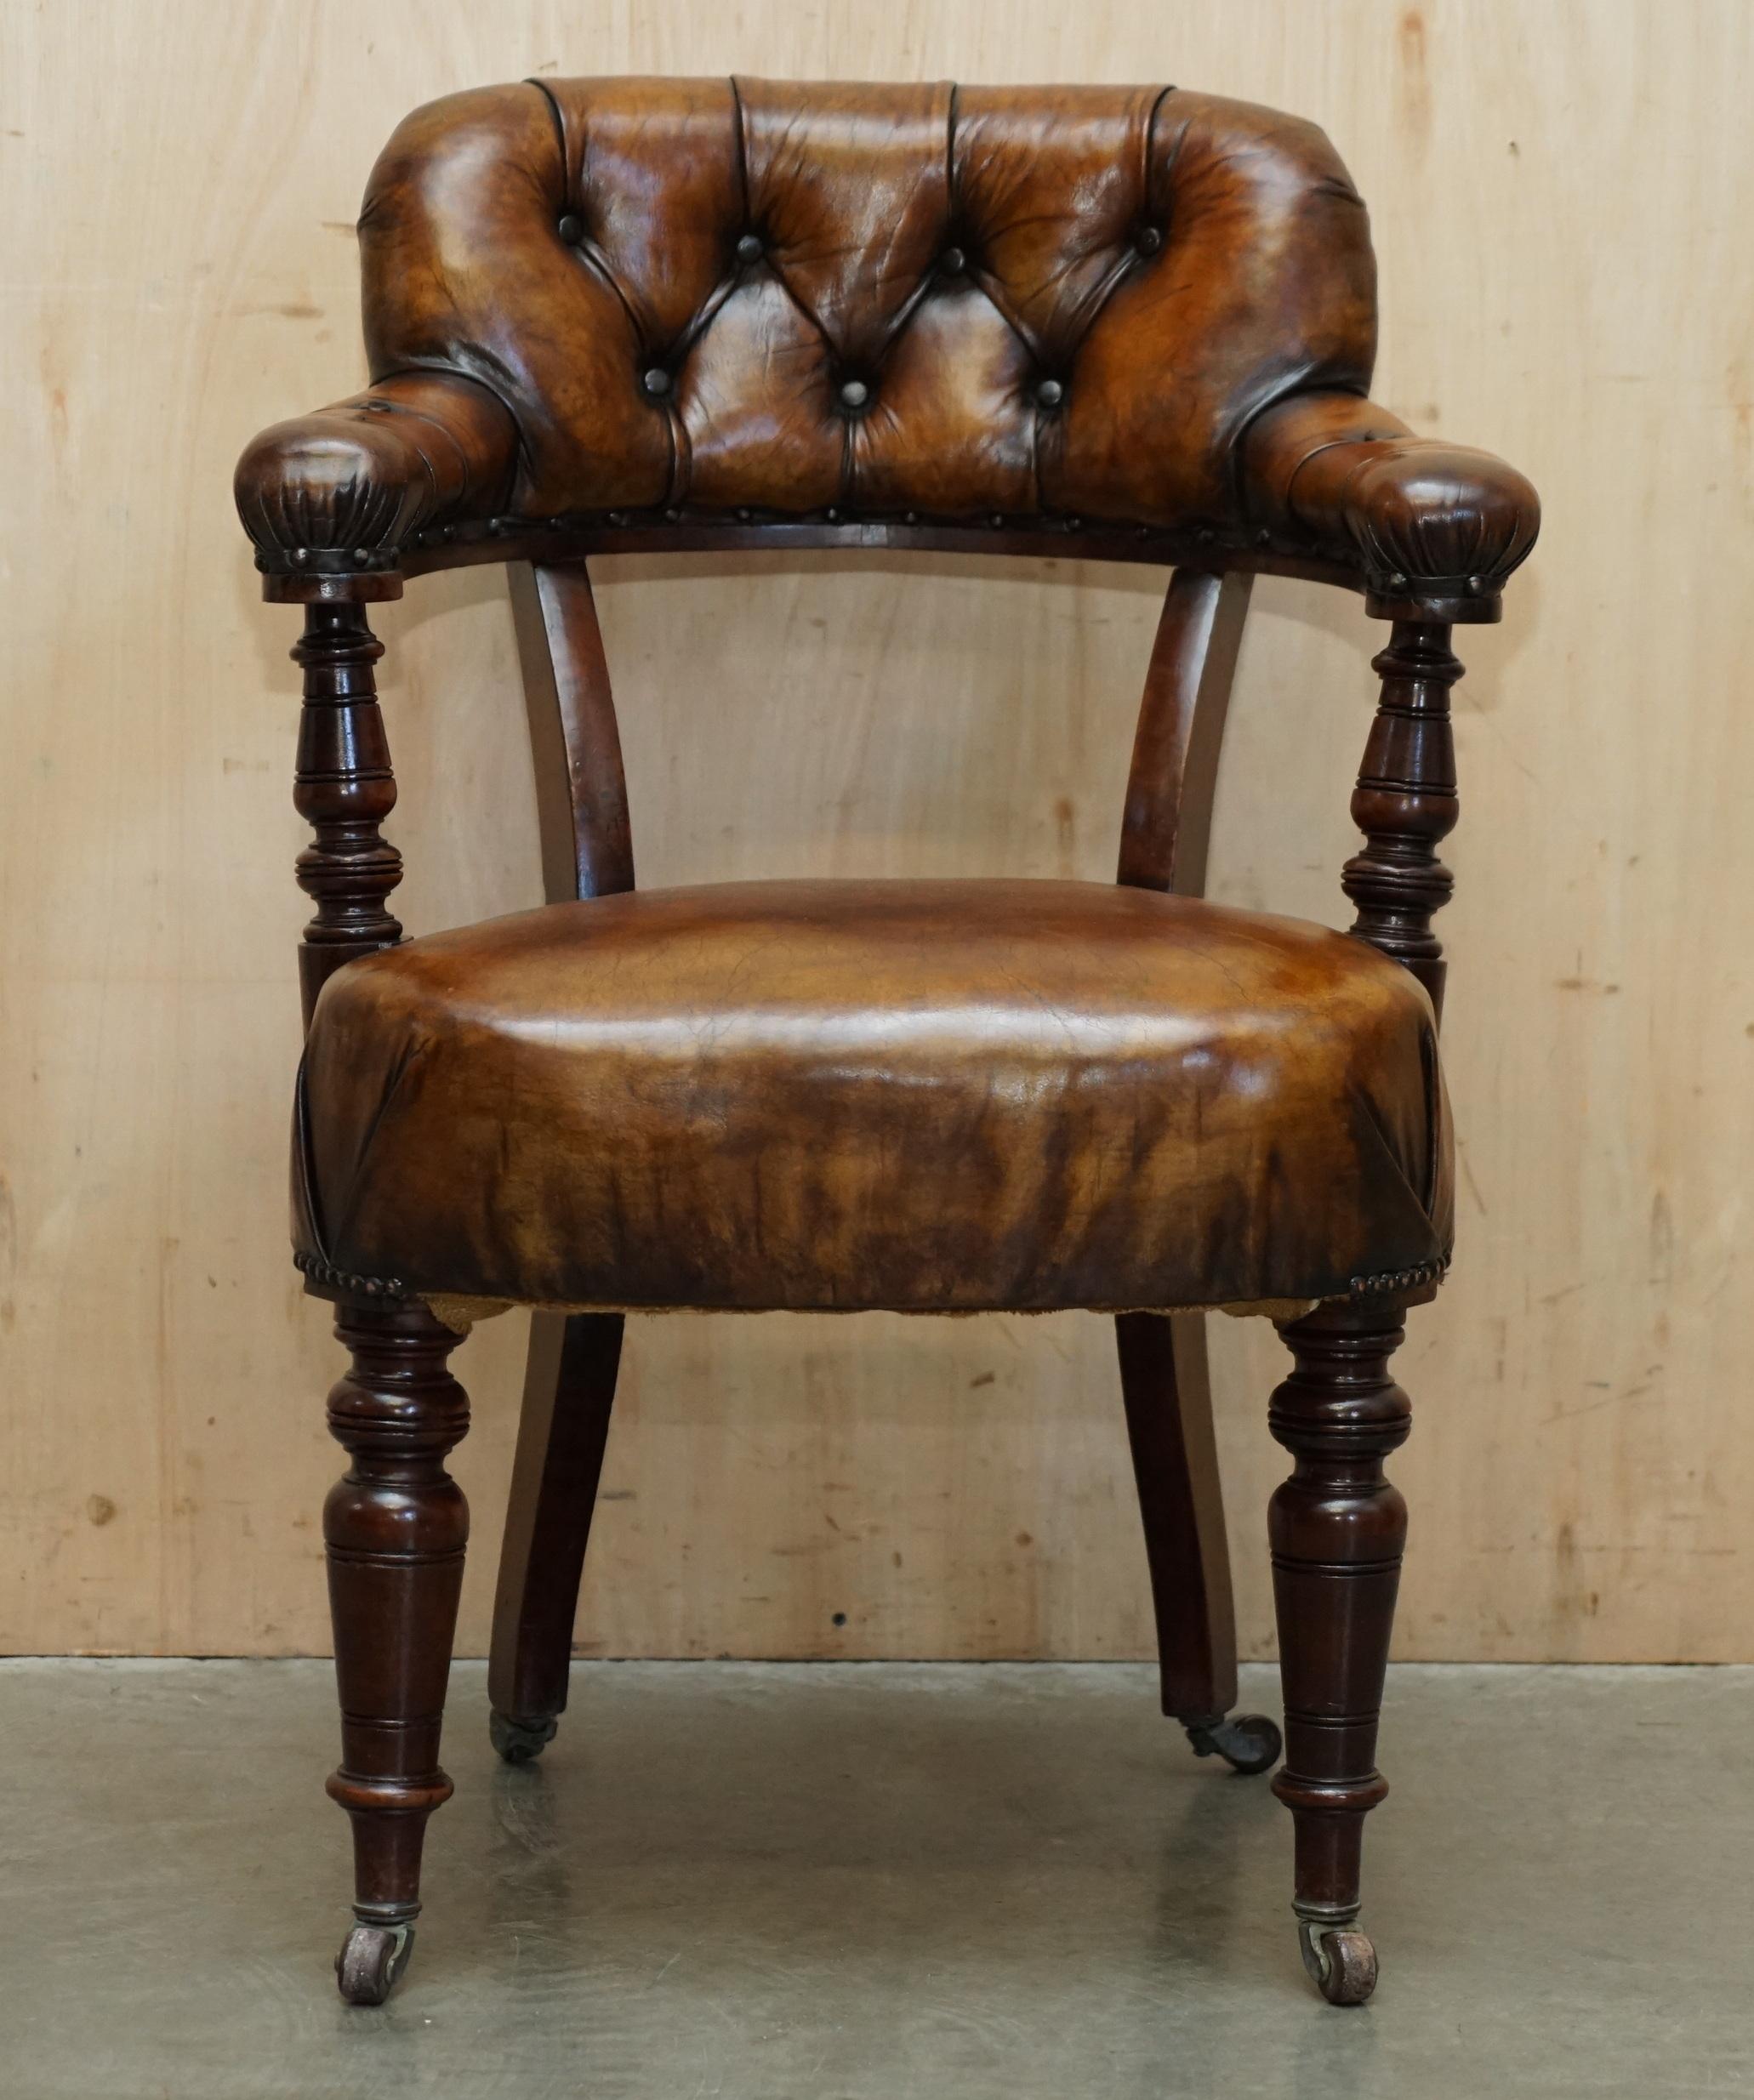 Royal House Antiques

Royal House Antiques is delighted to offer for sale this lovely, antique, fully restored original mahogany framed circa 1830 hand dyed Chesterfield Brown leather directors chair.

Please note the delivery fee listed is just a